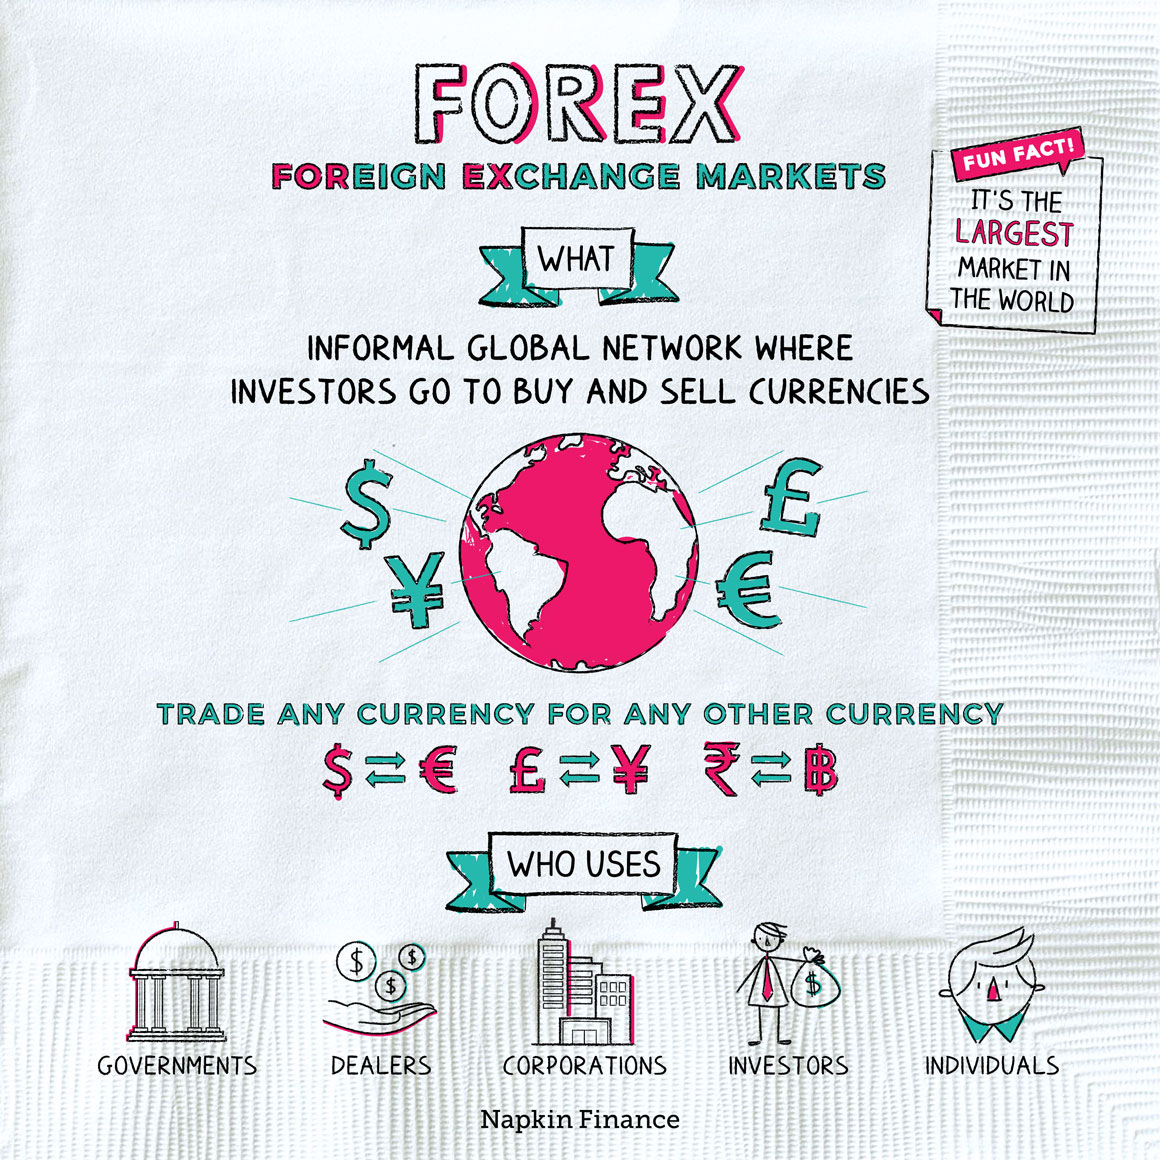 Forex or financial 4 xp forex place broker